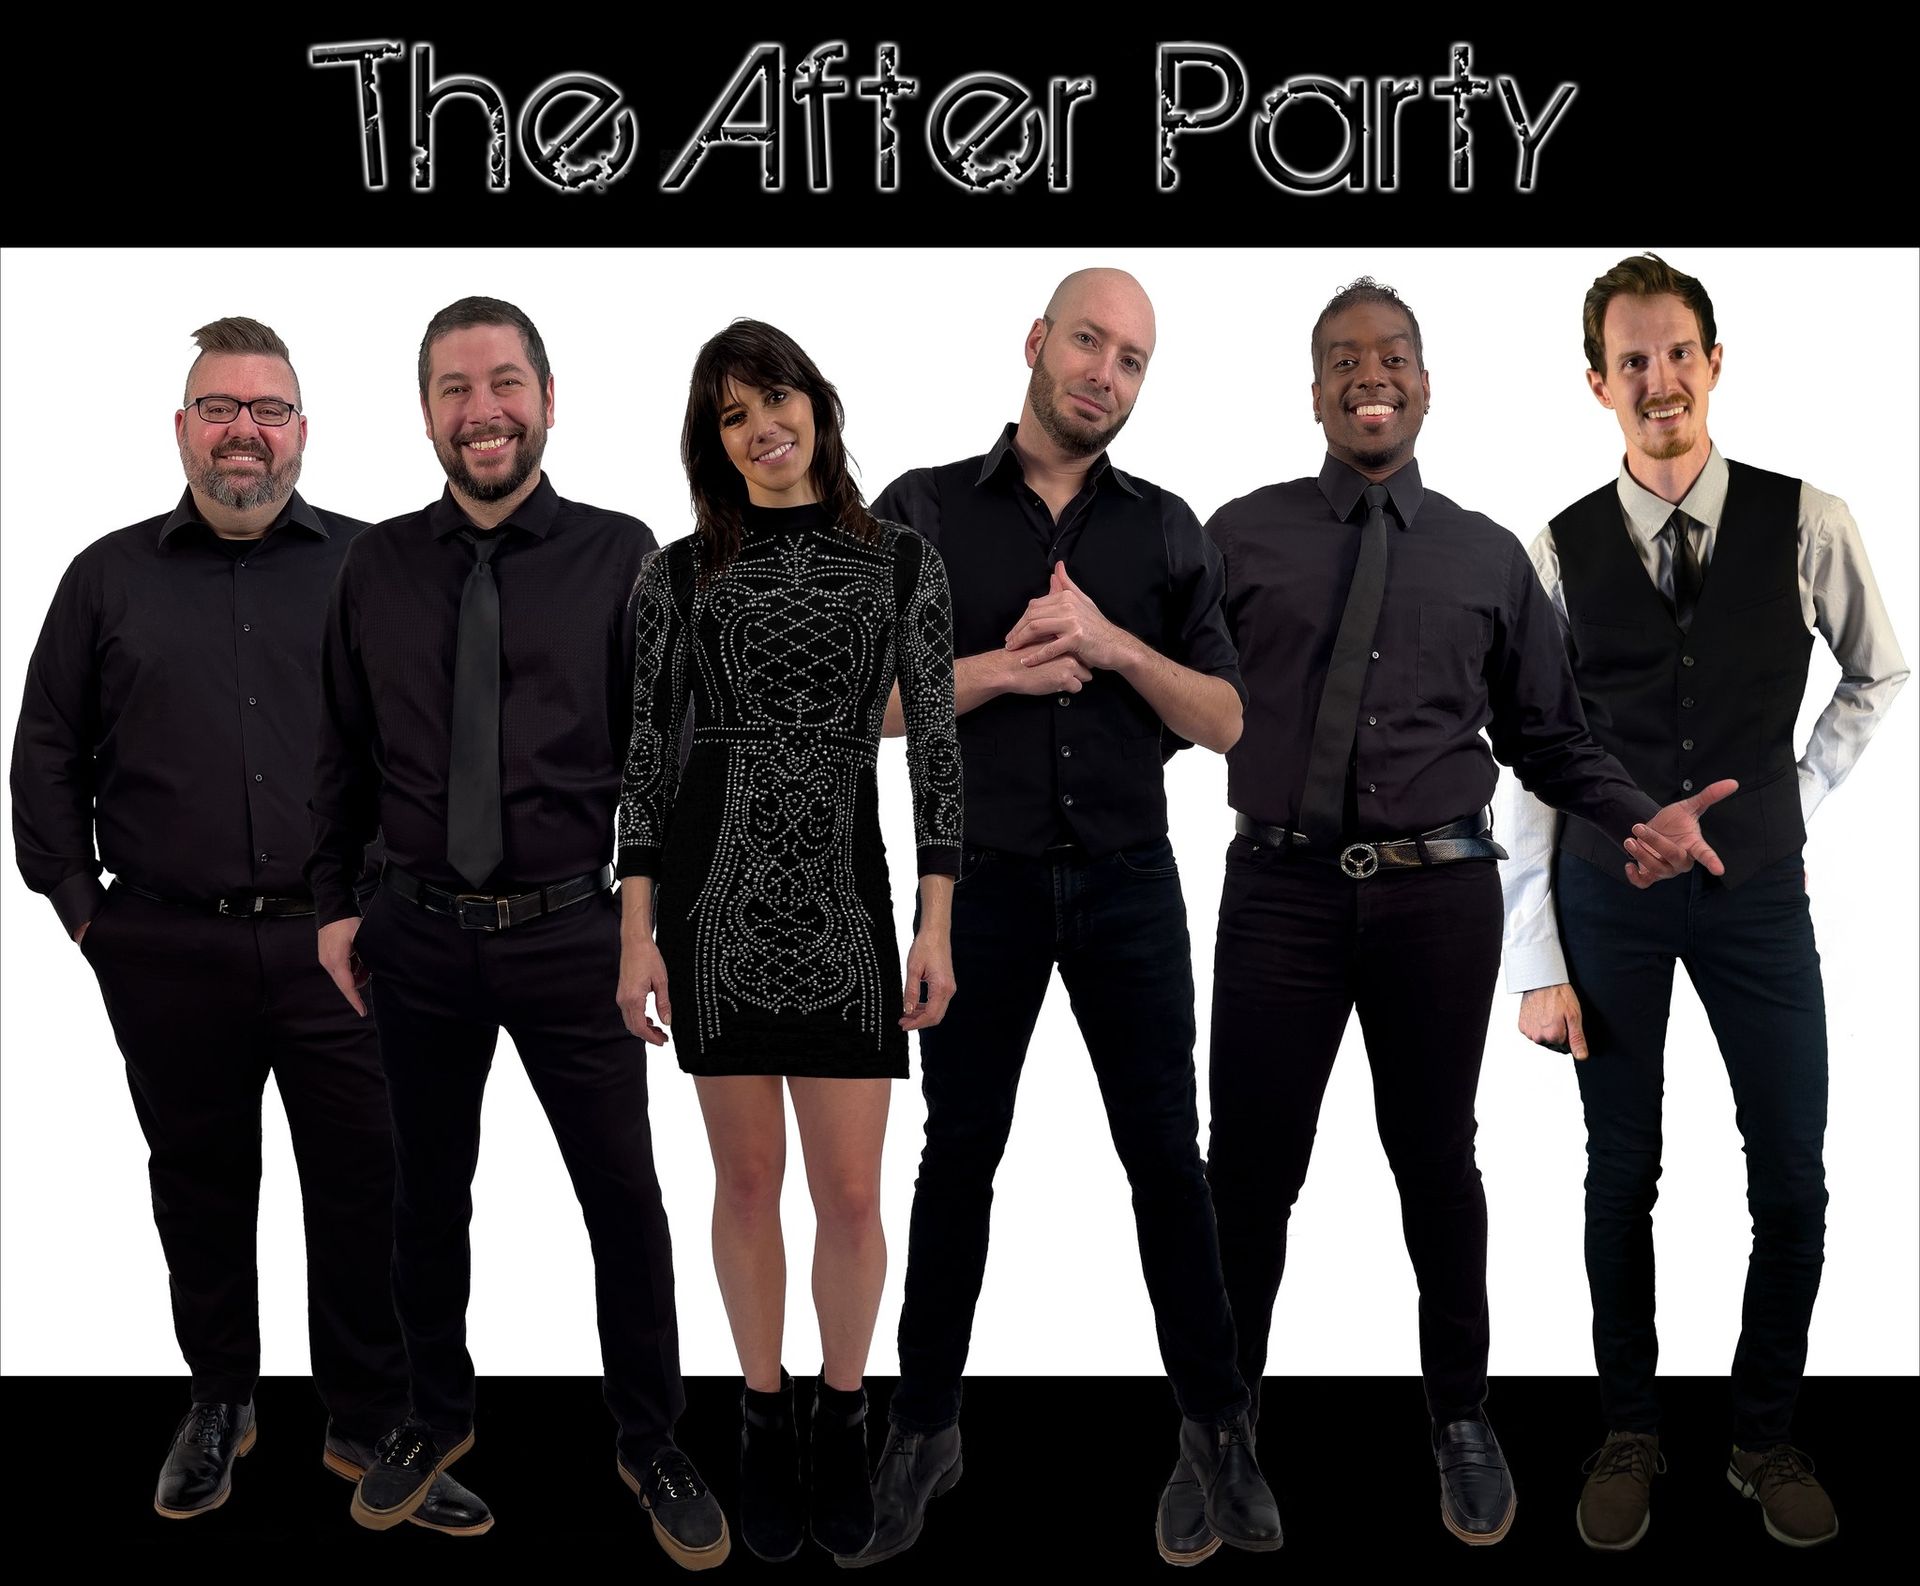 The After Party band